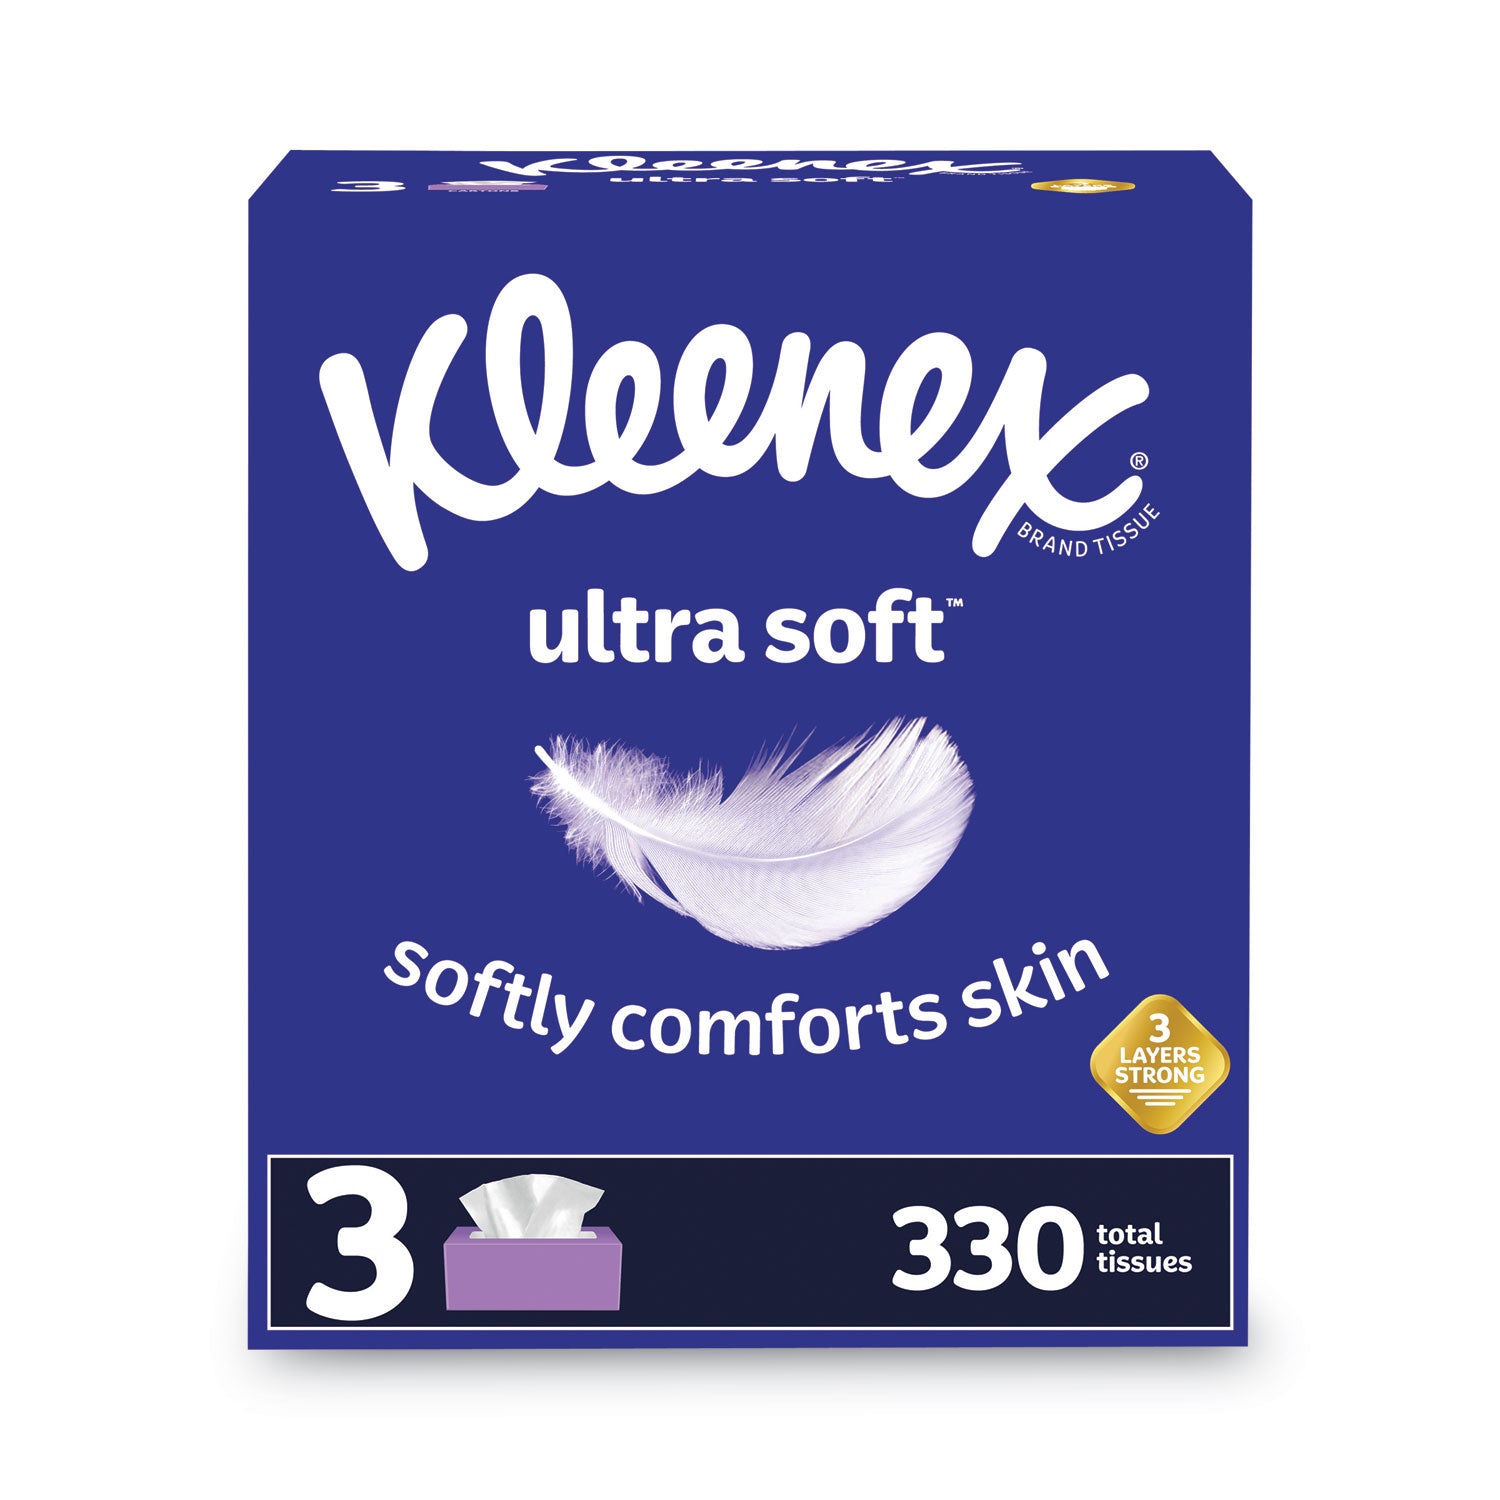 ultra-soft-facial-tissue-3-ply-white-110-sheets-box-3-boxes-pack_kcc50239 - 1